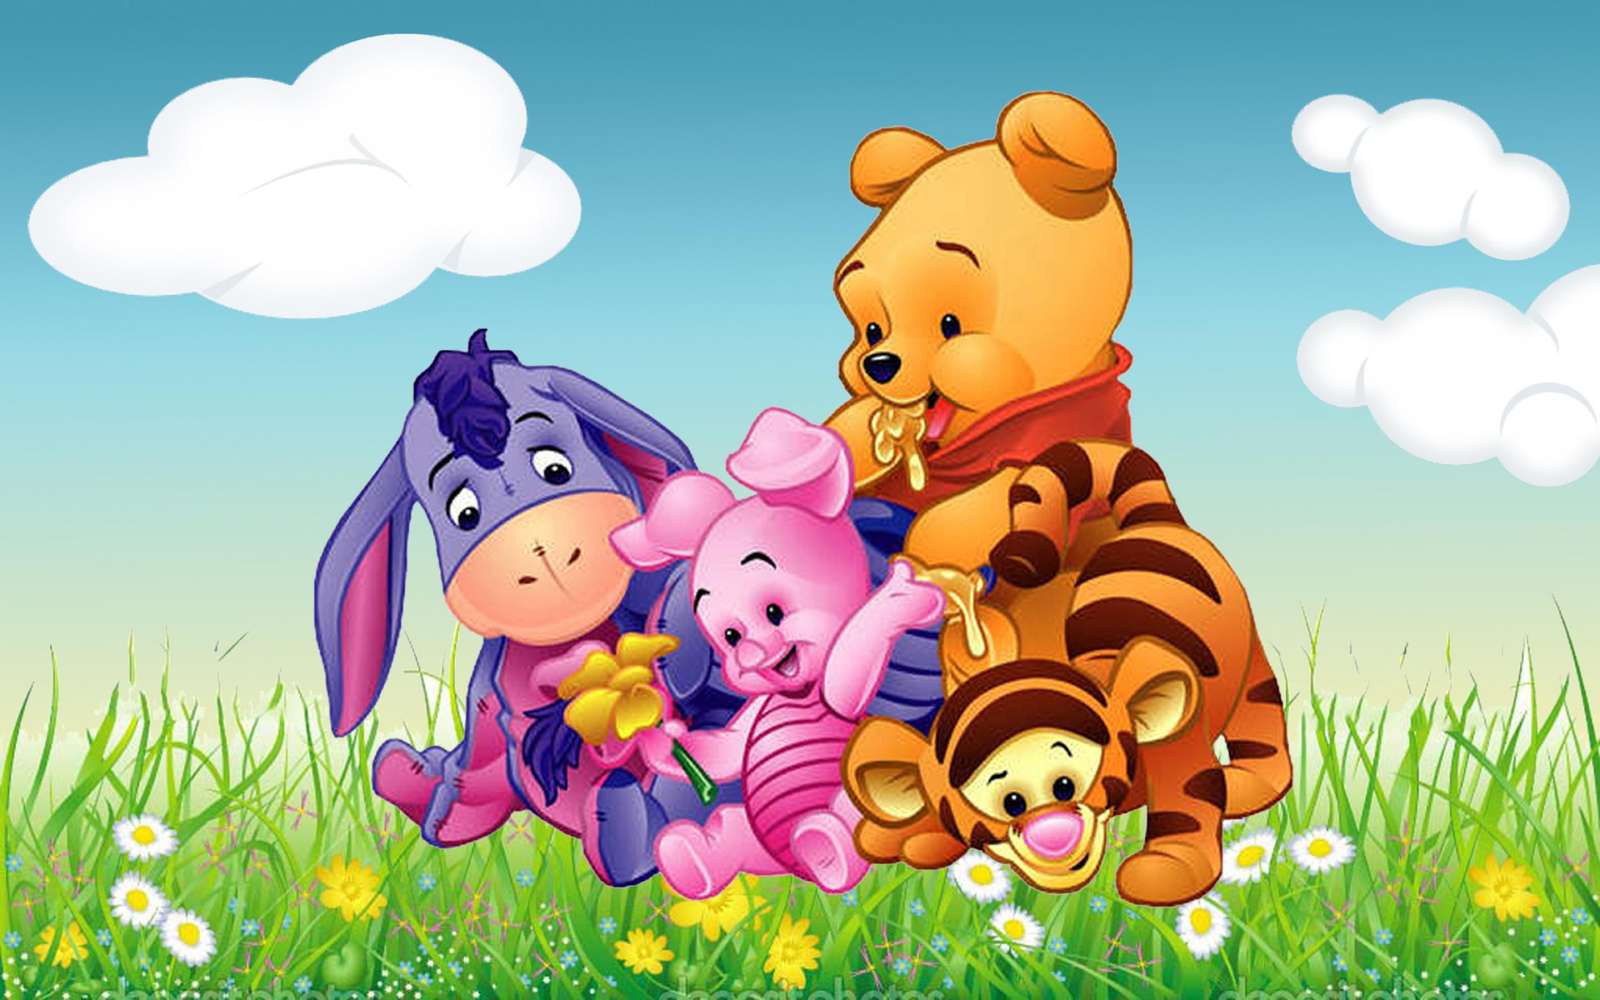 Pooh and Friends online puzzle